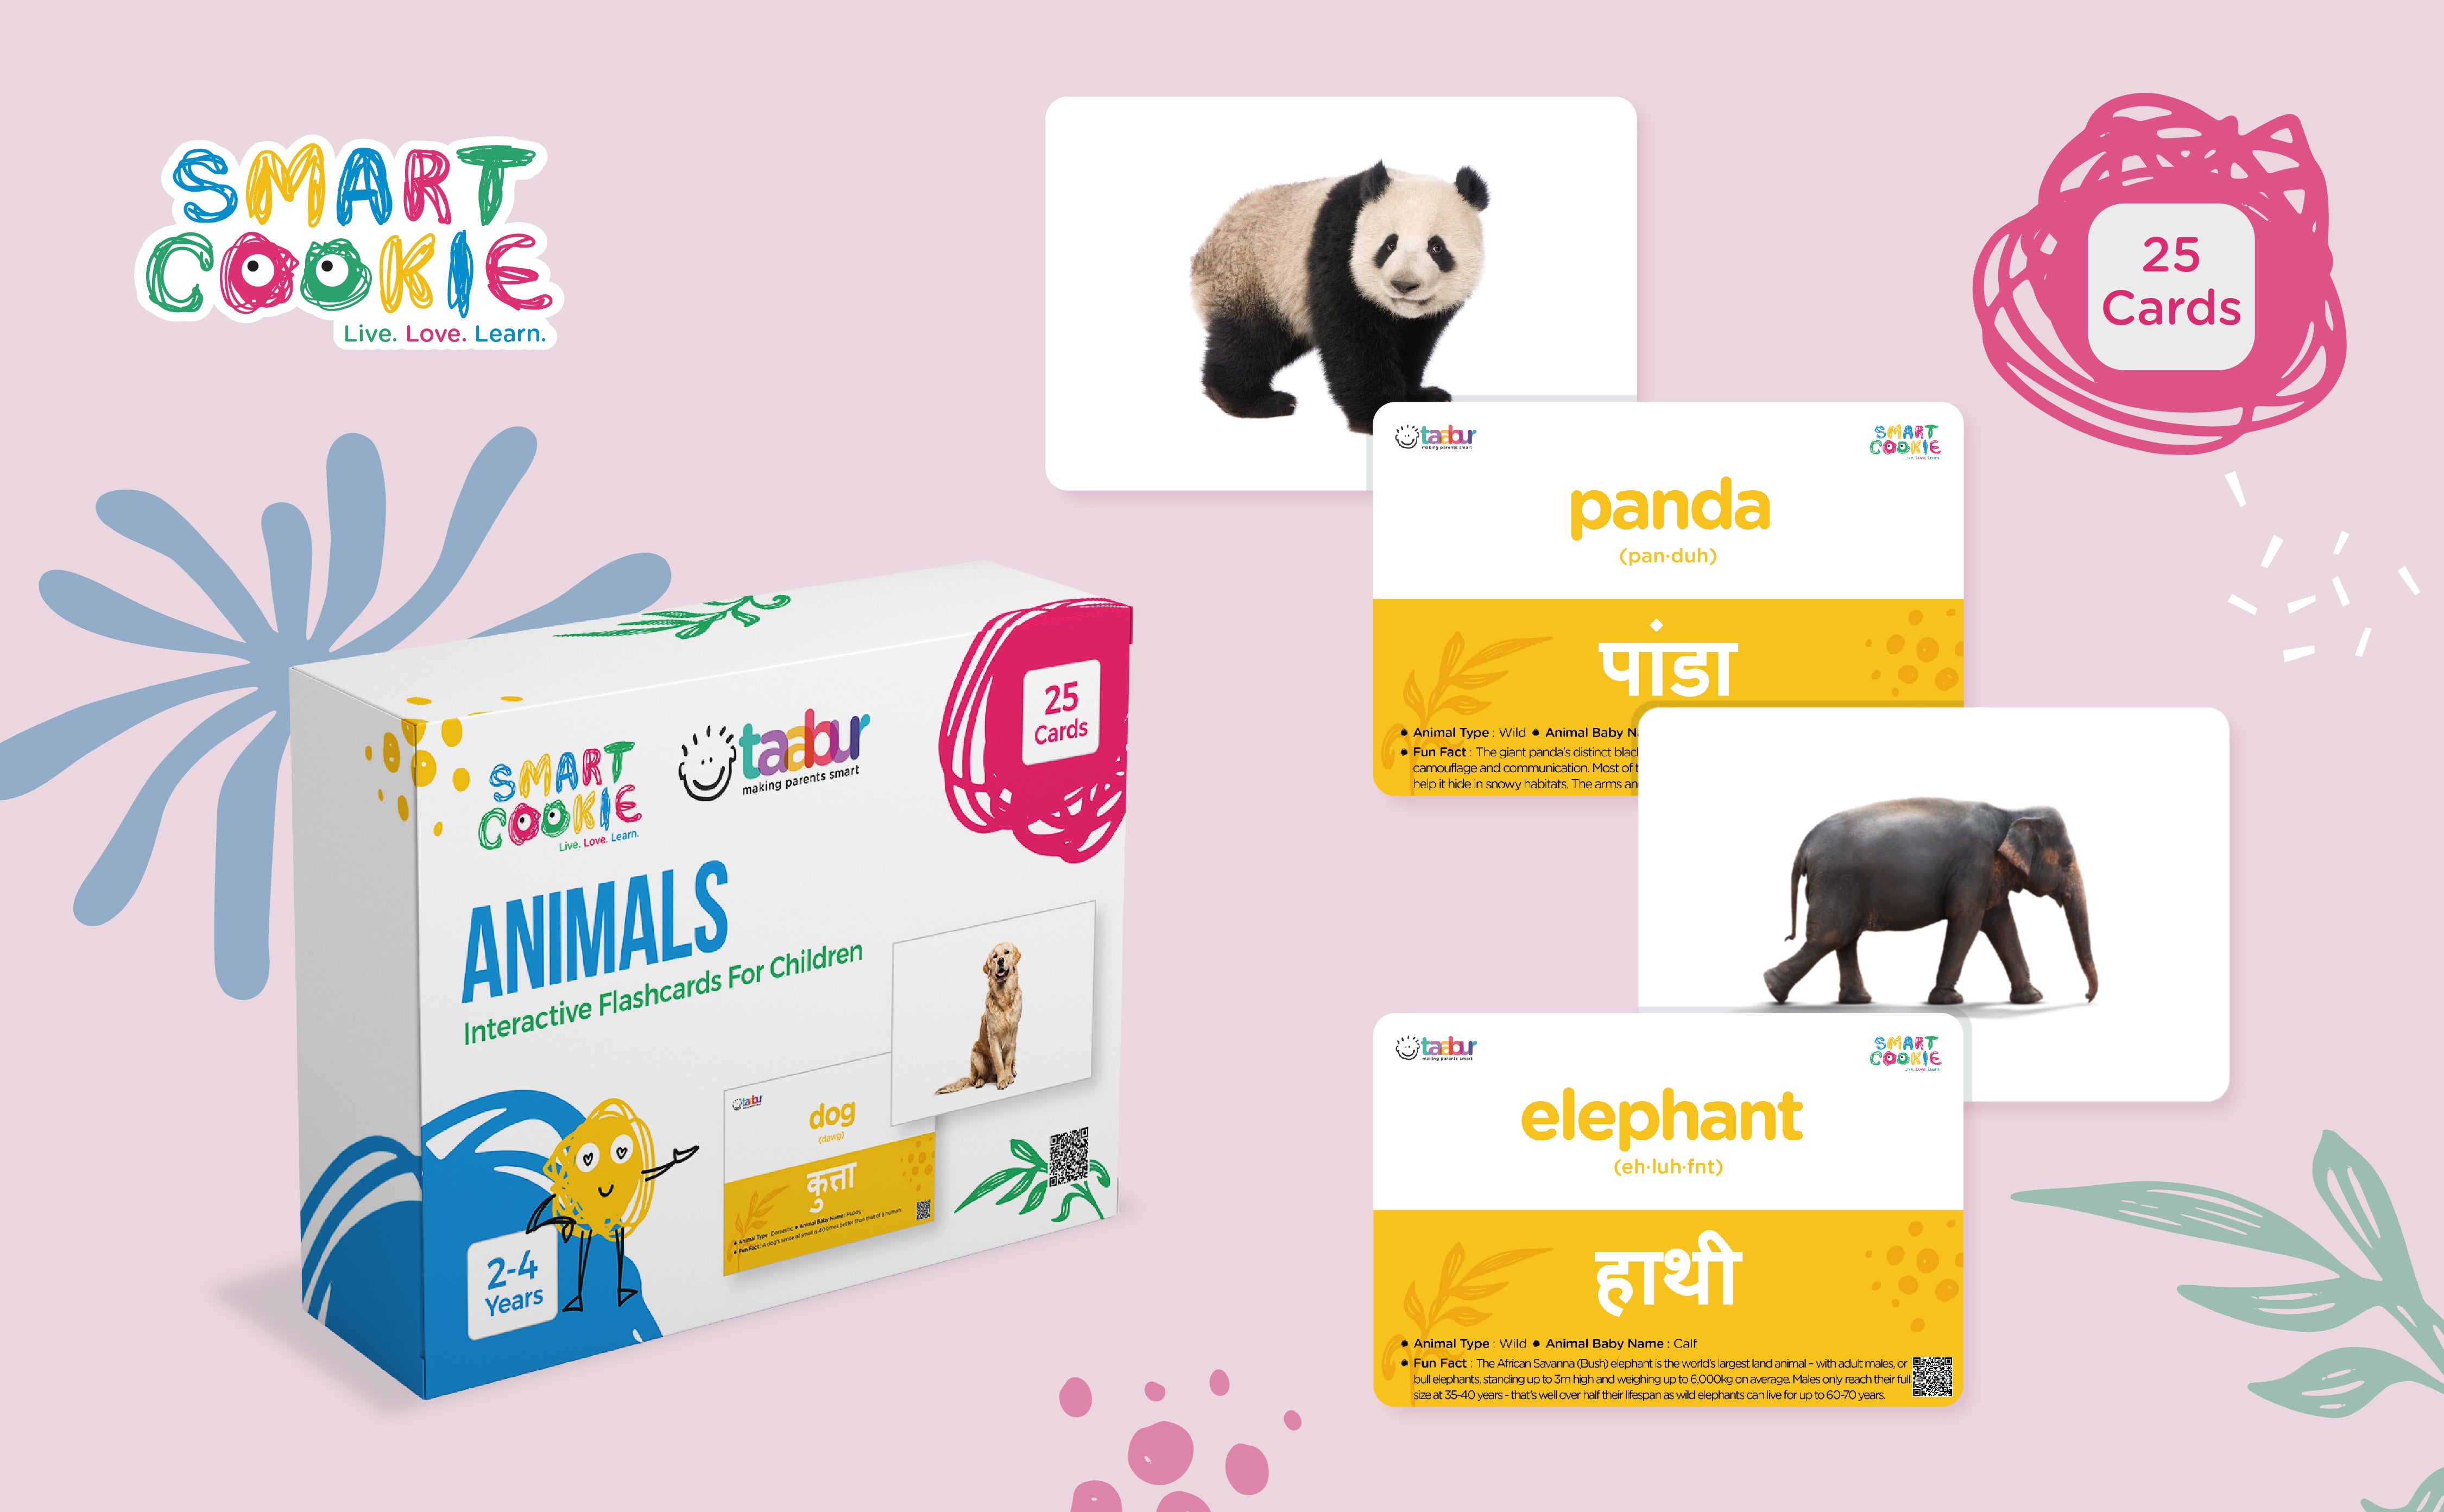 Animals - Interactive Flashcards for Children (25 Cards) - for Kids Aged 2 to 4 Years Old